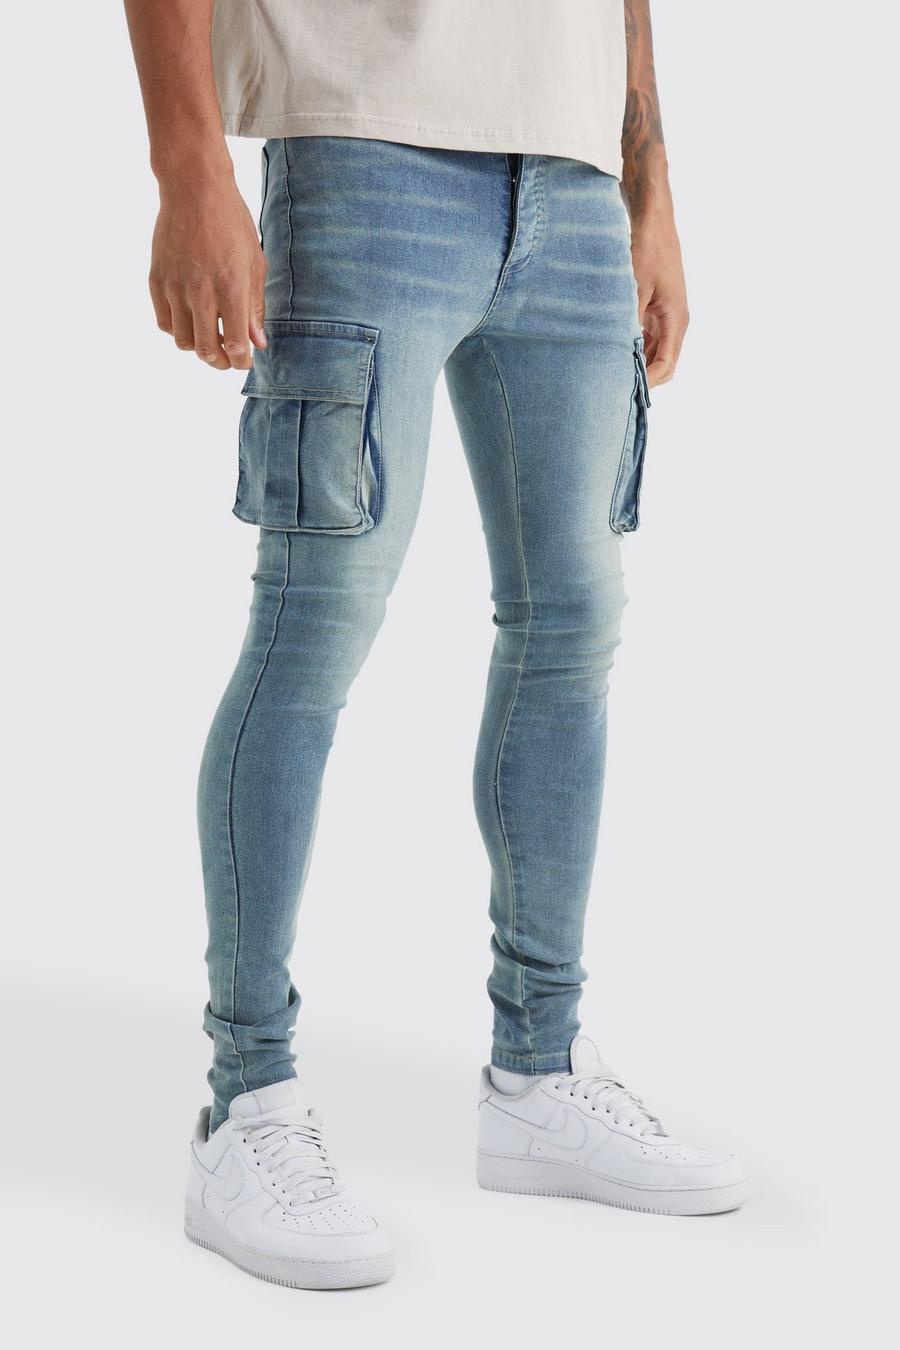 Jeans Cargo Tall Super Skinny Fit, Antique blue